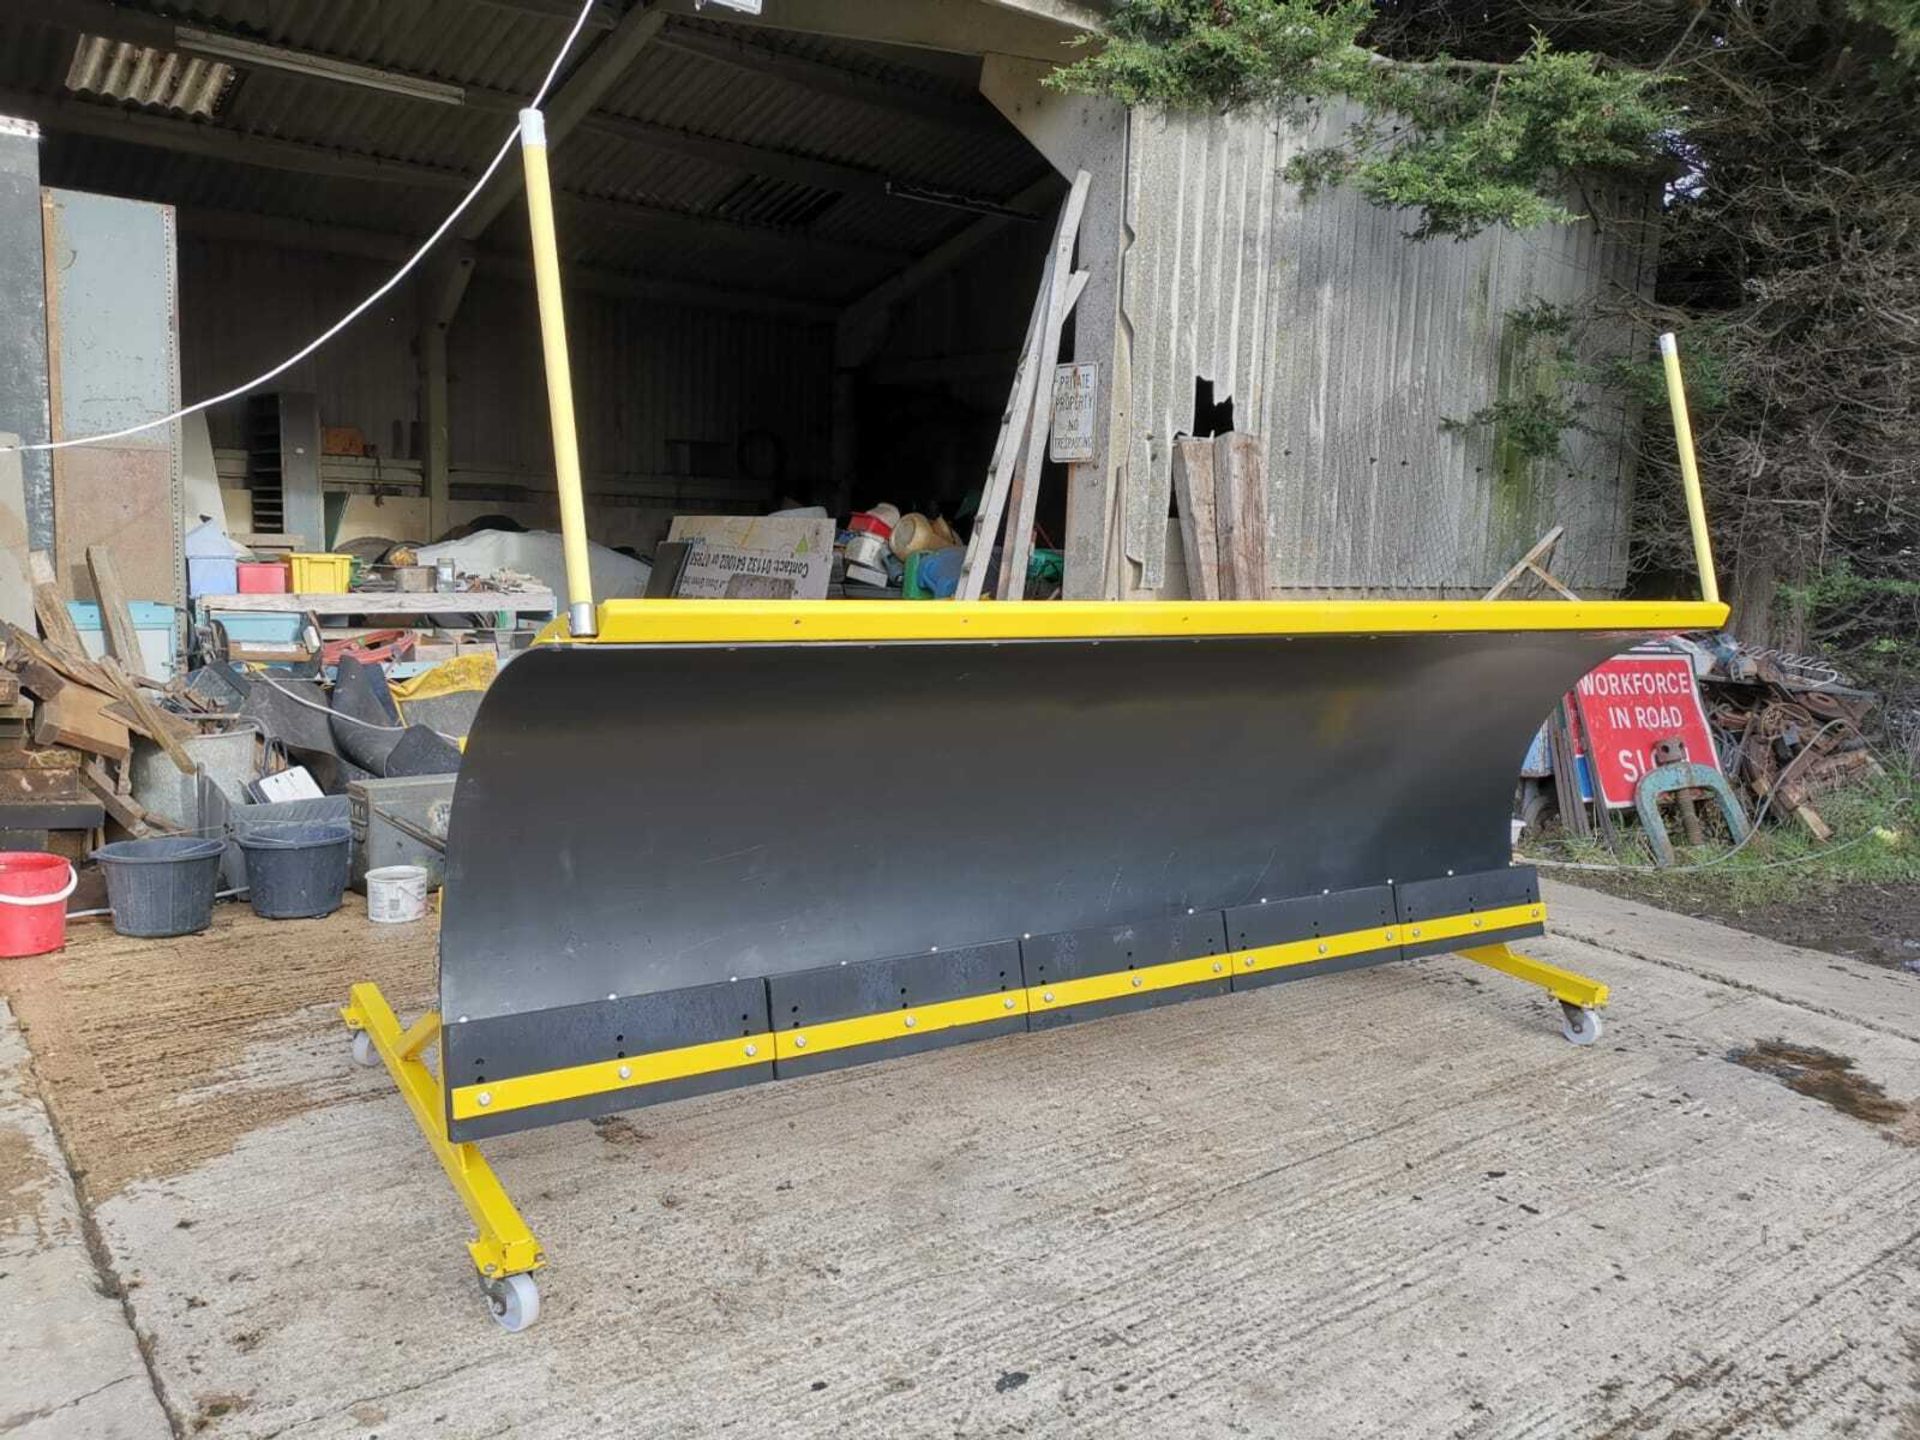 SNOW PLOUGH, TRACTOR, LORRY, ECON MODEL: WSPFPR39, DIRECT FROM M.O.D, 10' BLADE OR 3m. *PLUS VAT*